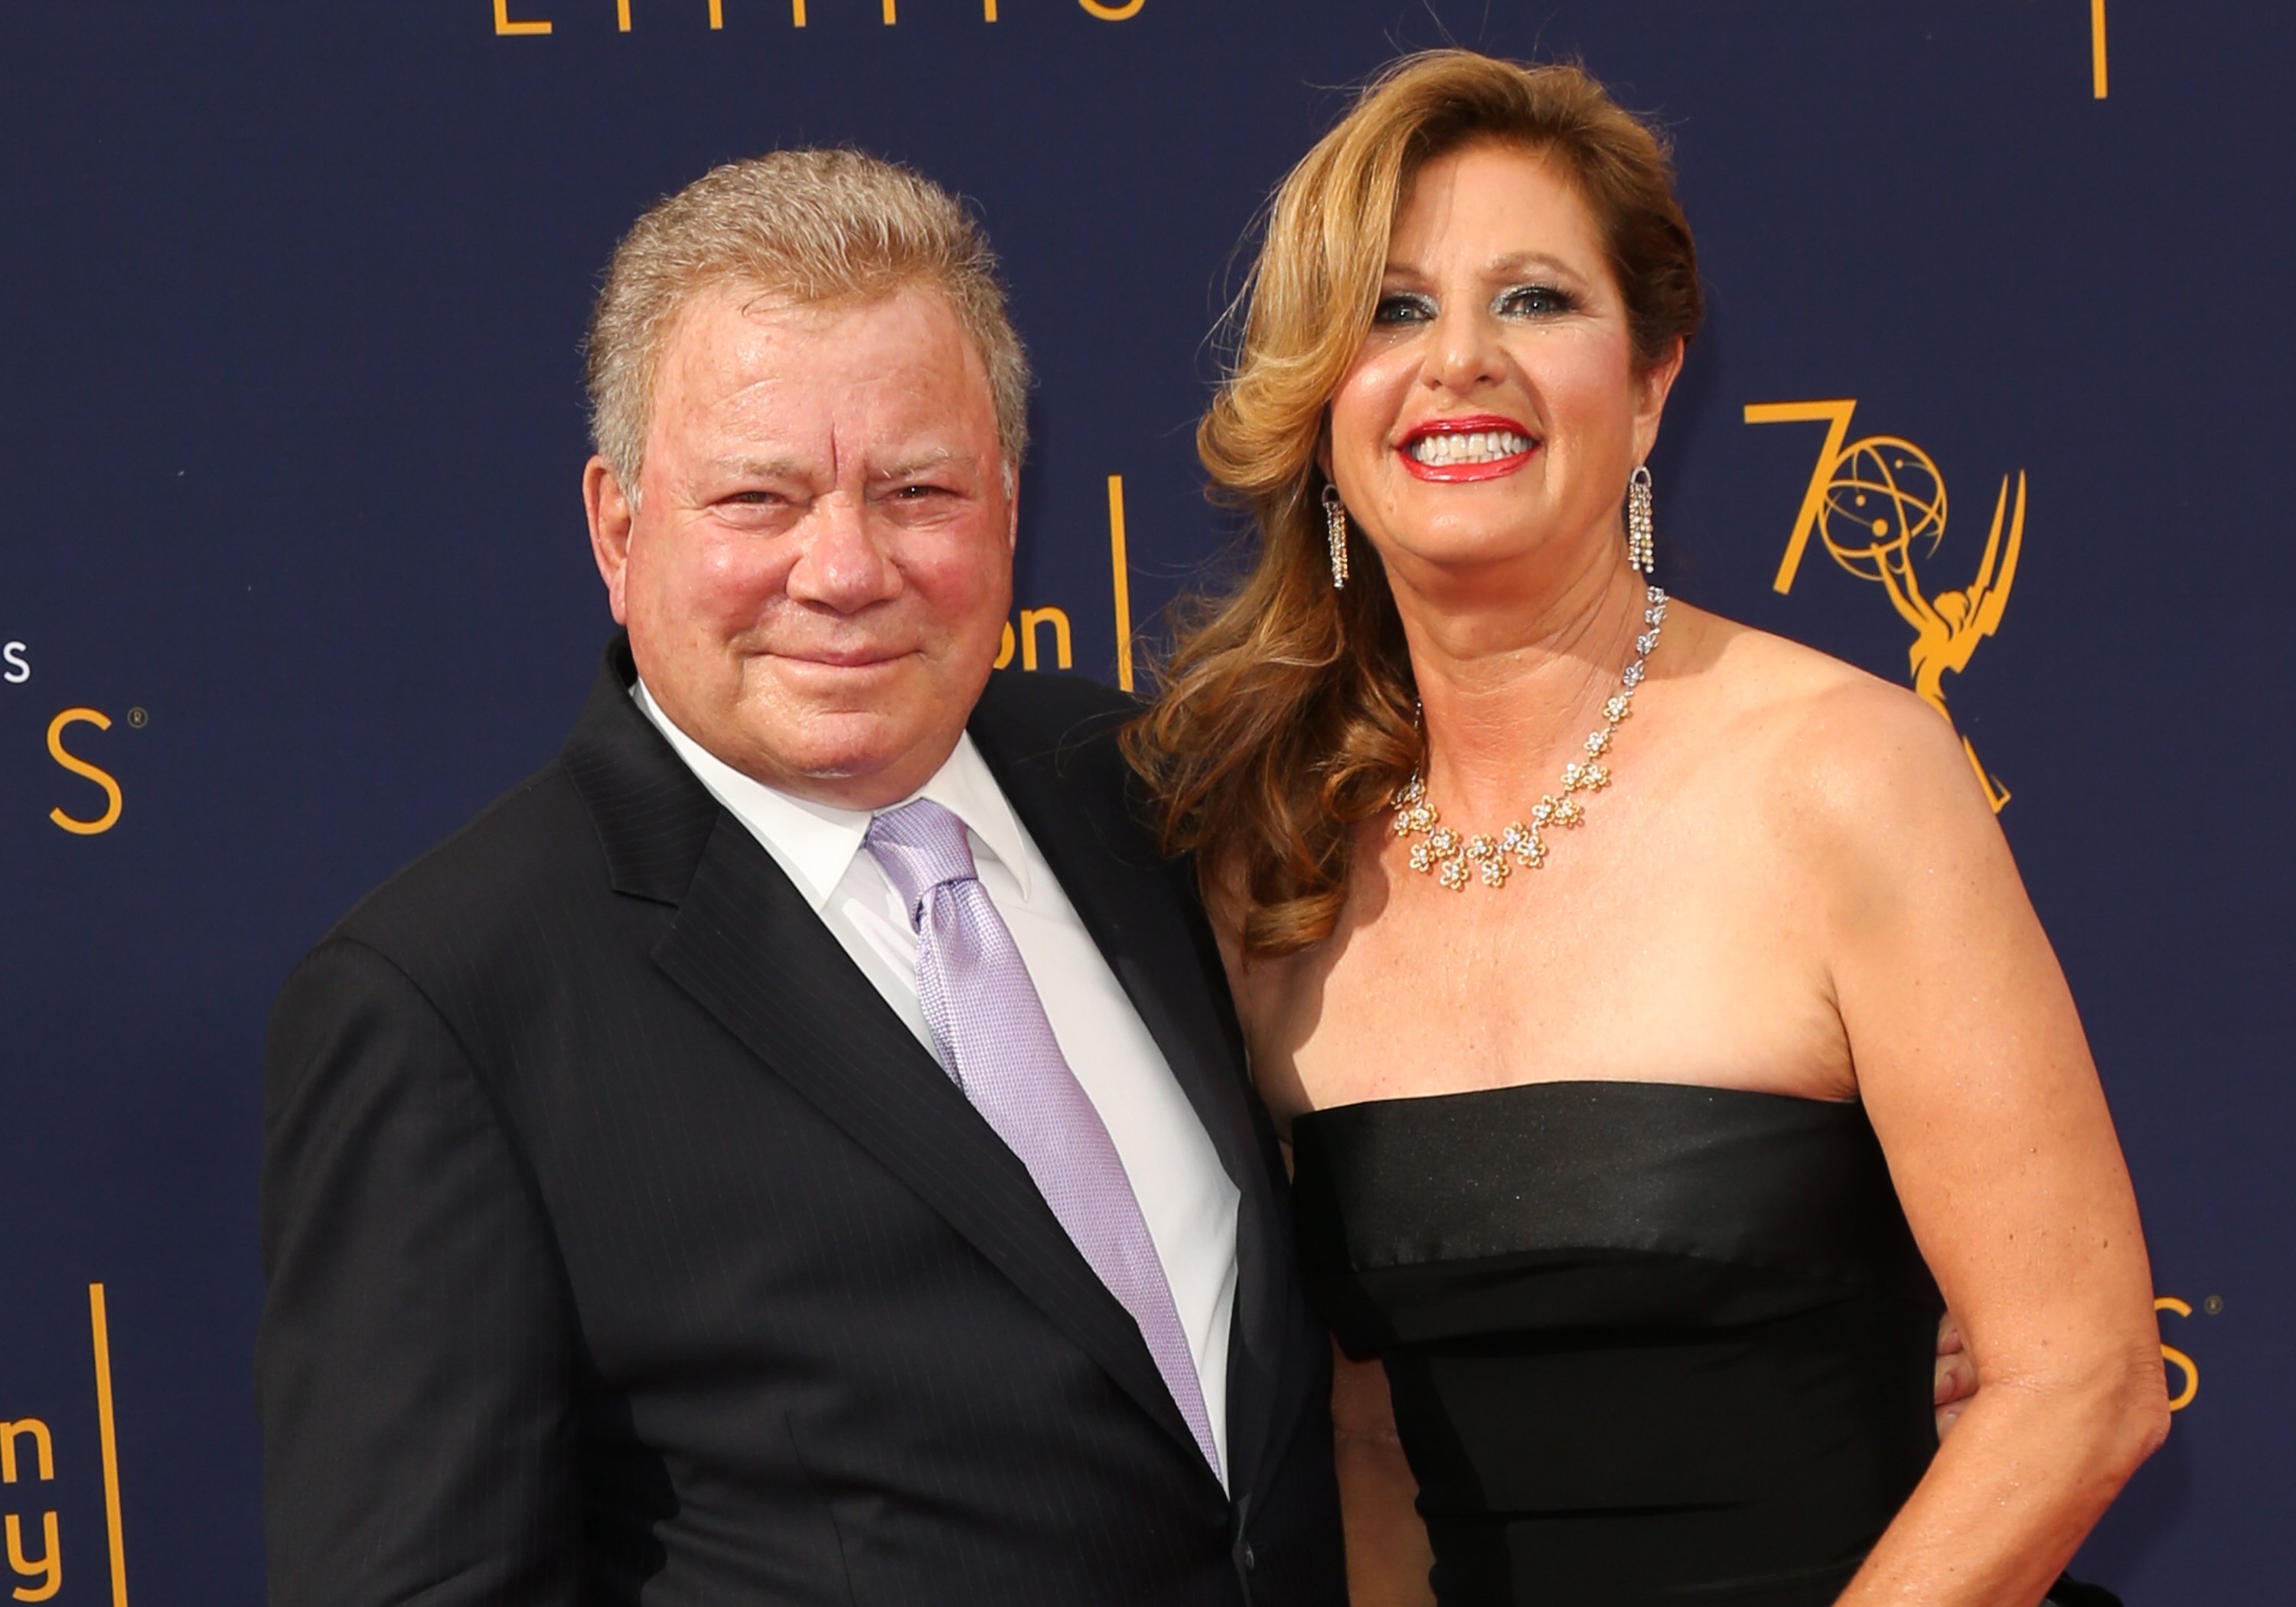 William Shatner and Elizabeth Anderson Martin at the 2018 Creative Arts Emmy Awards in California on September 8, 2018 | Source: Getty Images